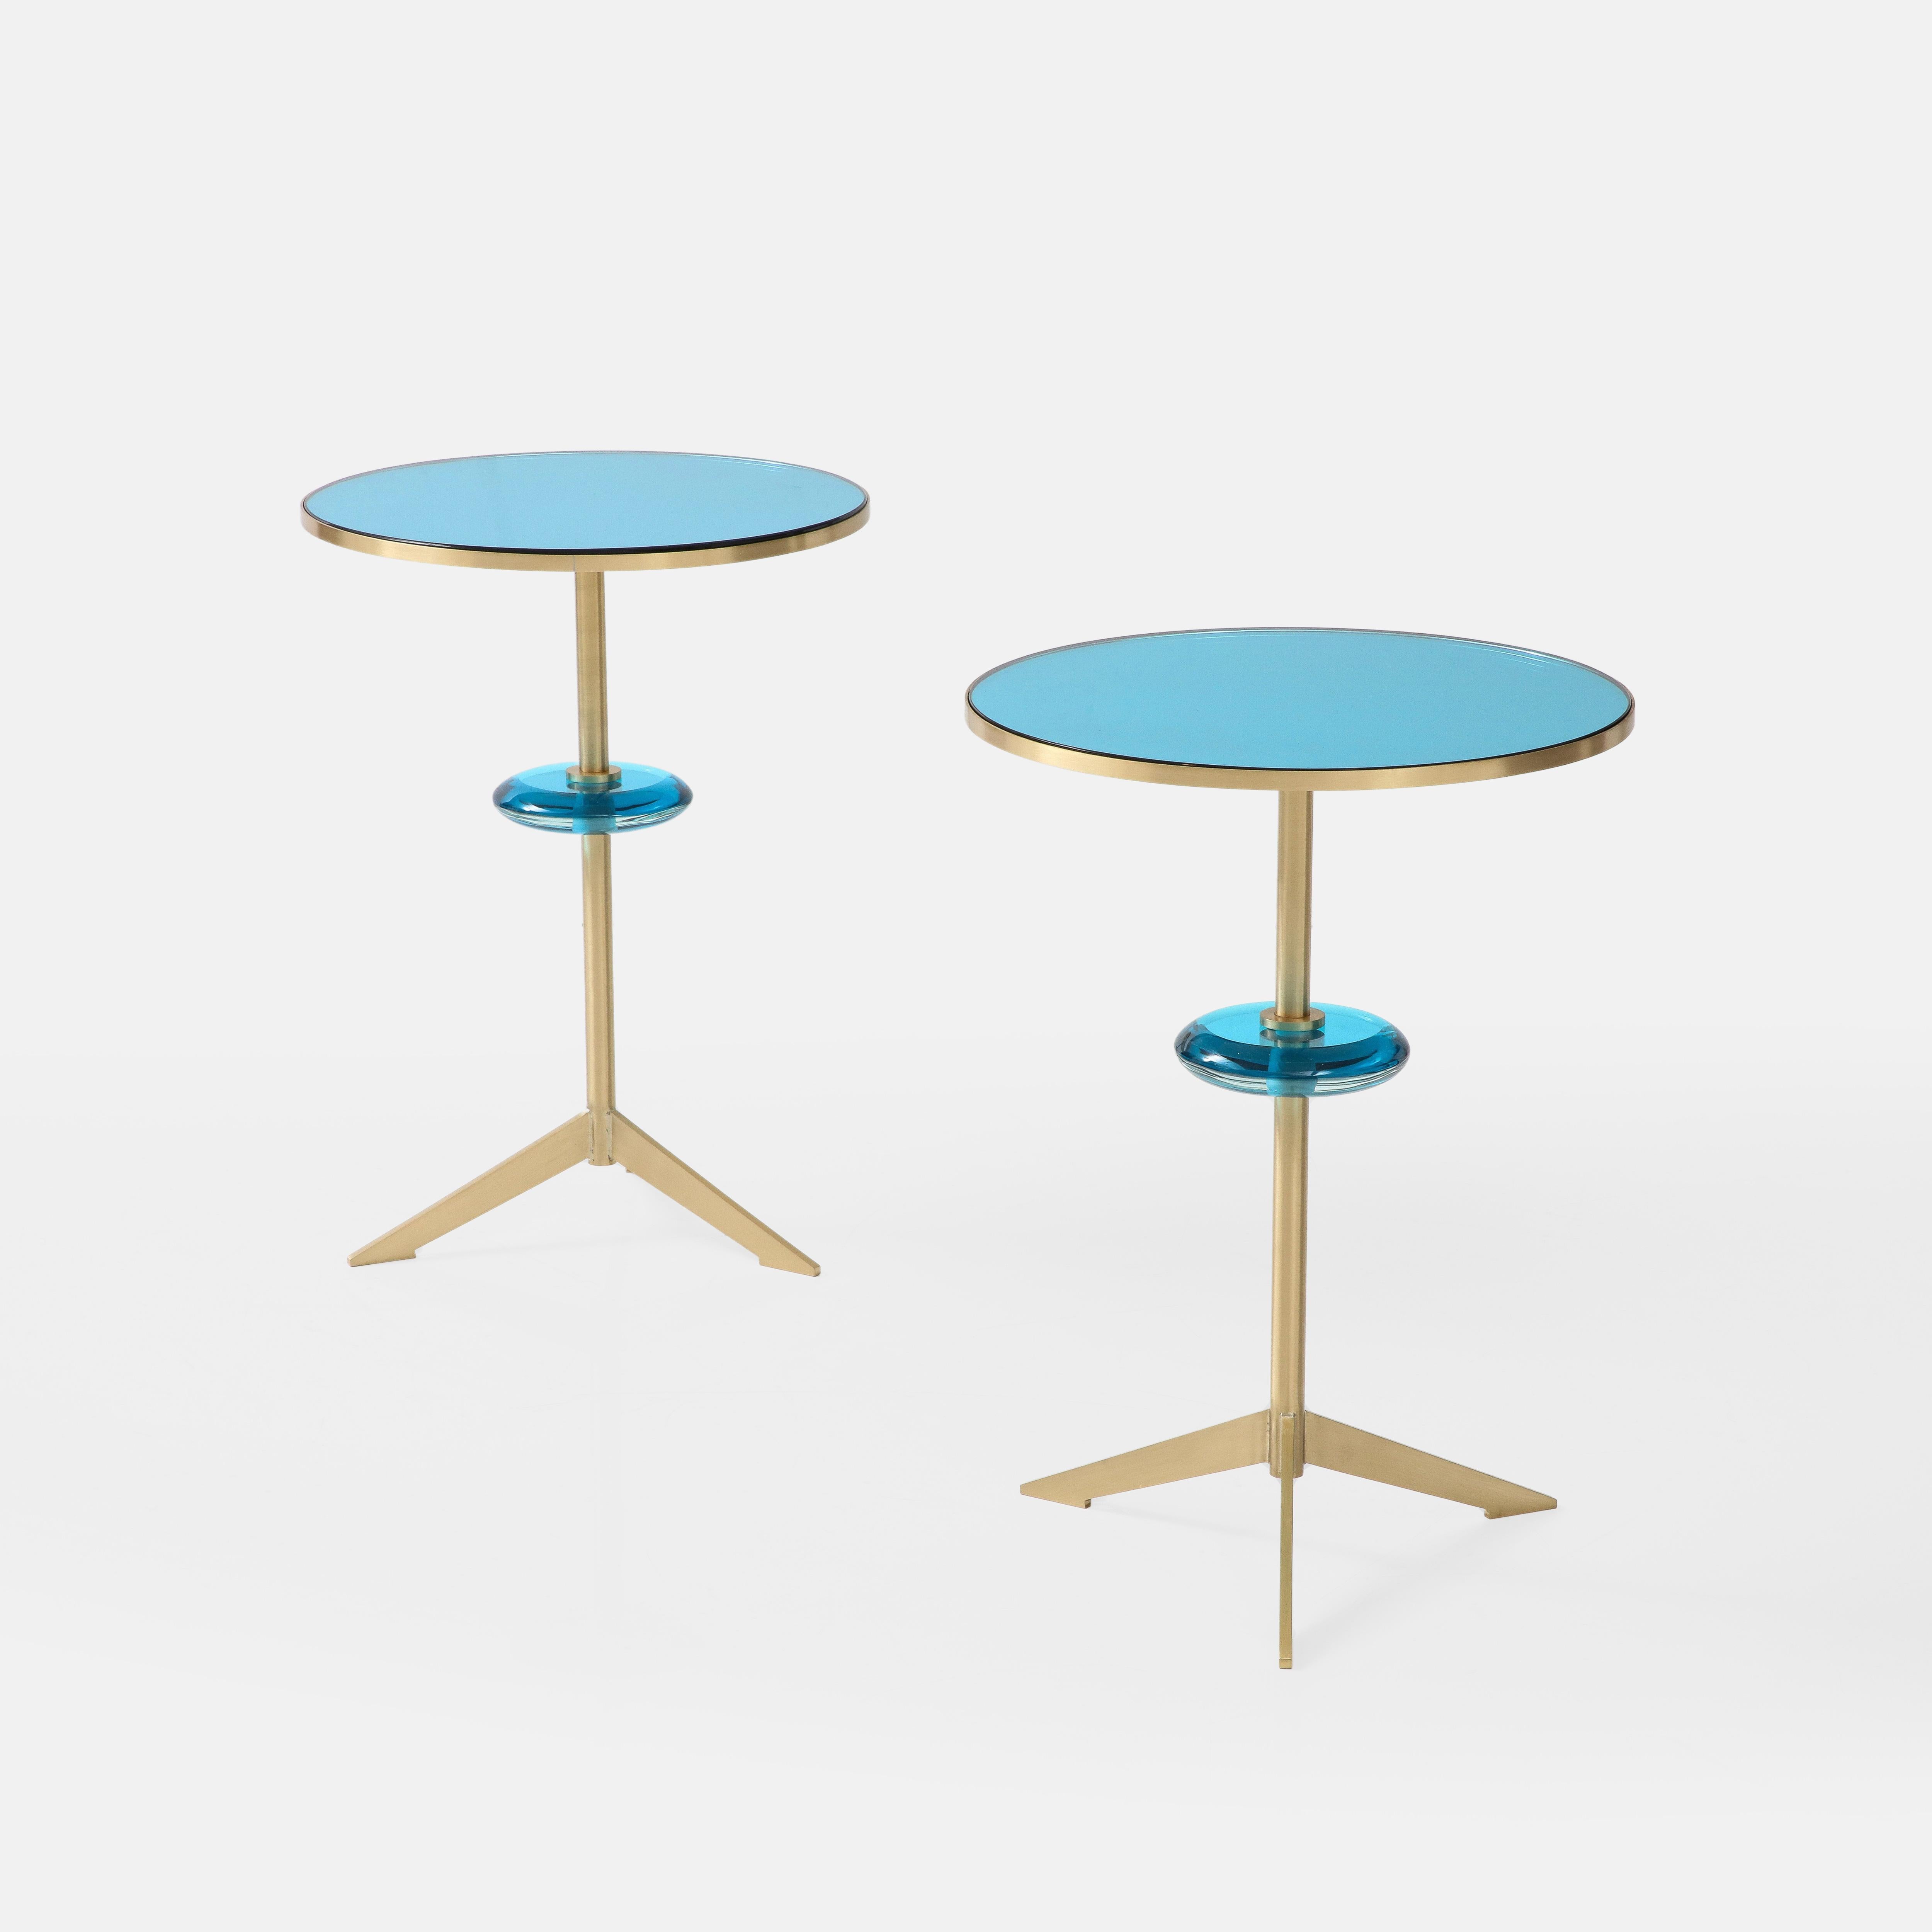 Effetto Vetro exquisite custom contemporary pair of round side tables with mirrored colored glass top inset on satin brass tripod base with floating colored glass orb suspended on brass stem. This lovely pair (or single) of modernist sculptural side